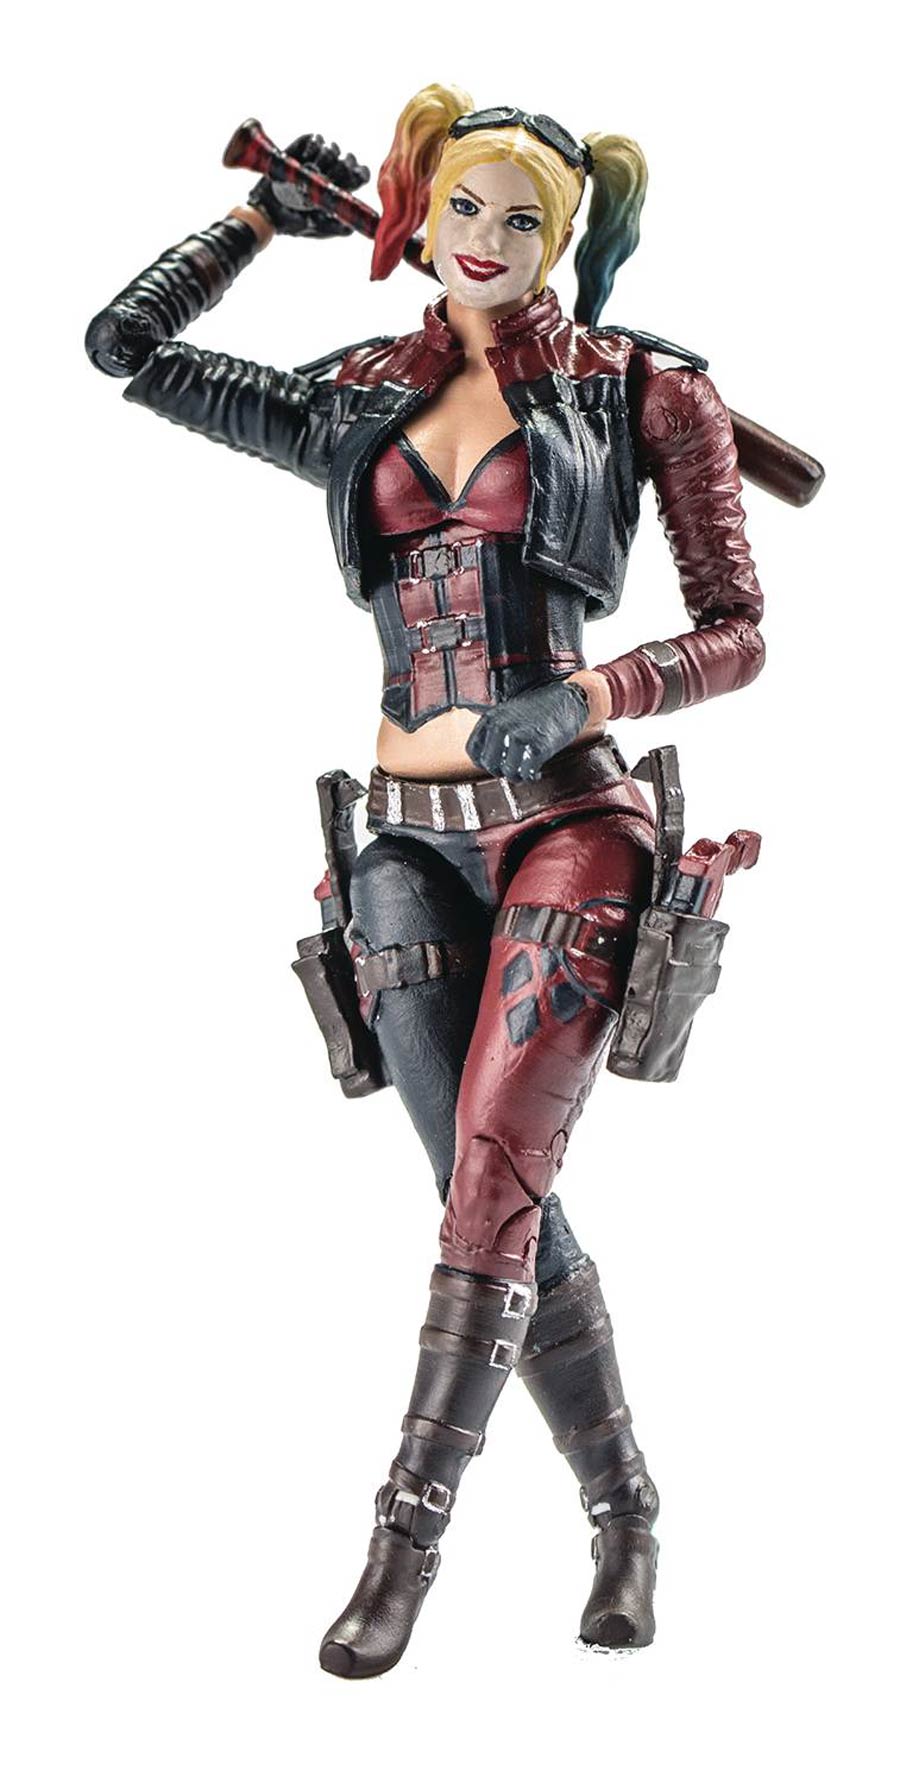 Injustice 2 Harley Quinn 1/18 Scale Previews Exclusive Figure